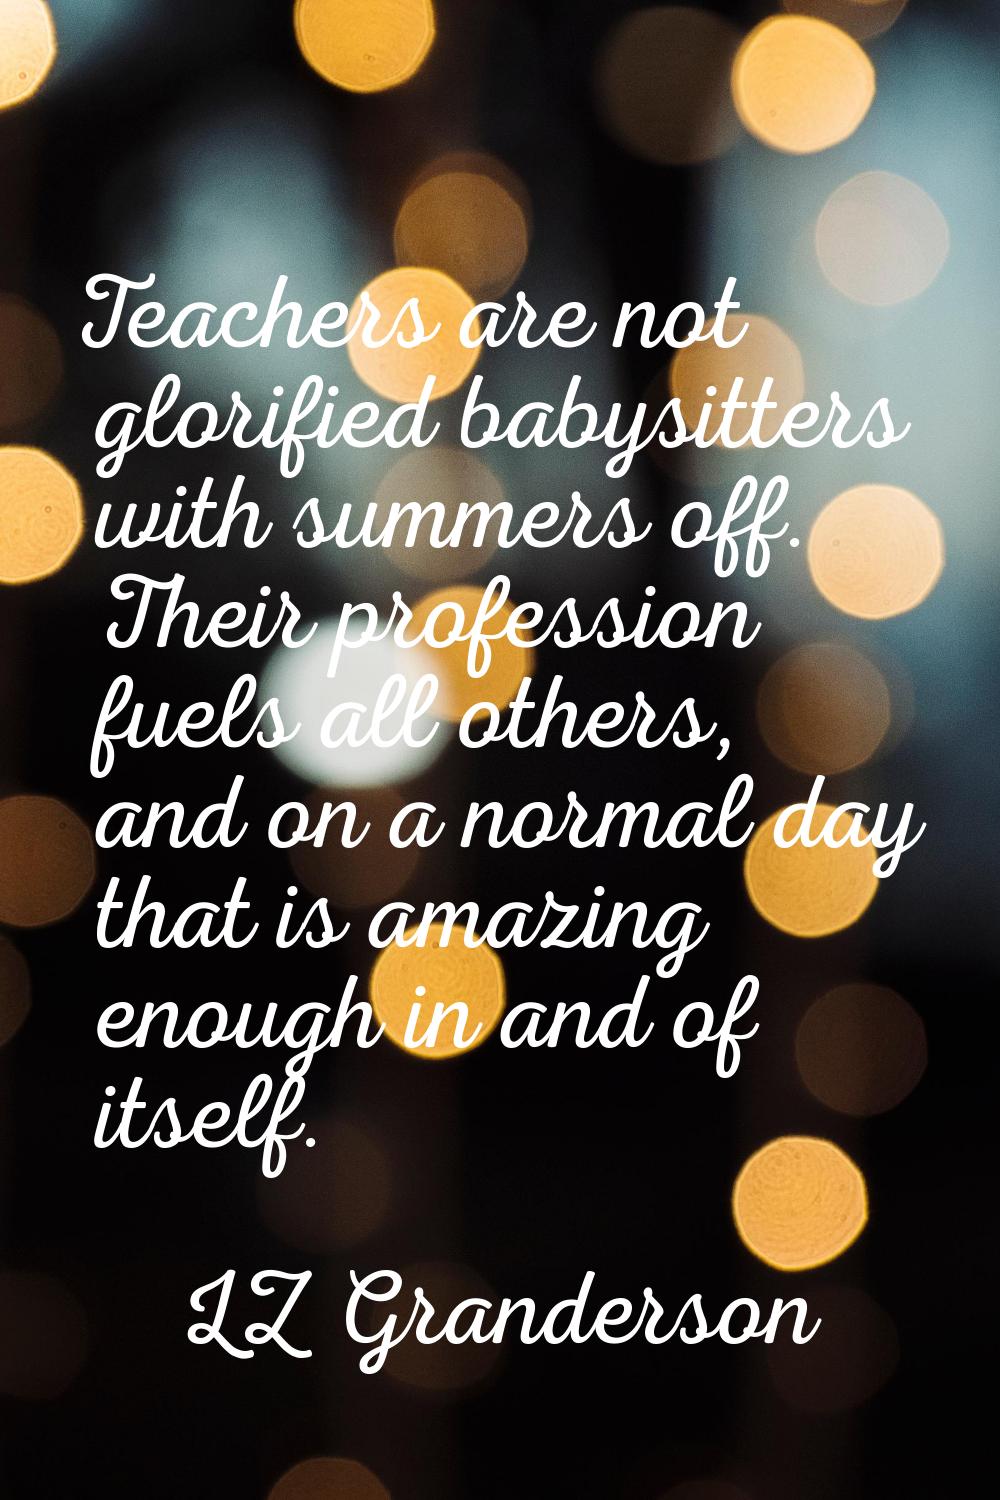 Teachers are not glorified babysitters with summers off. Their profession fuels all others, and on 